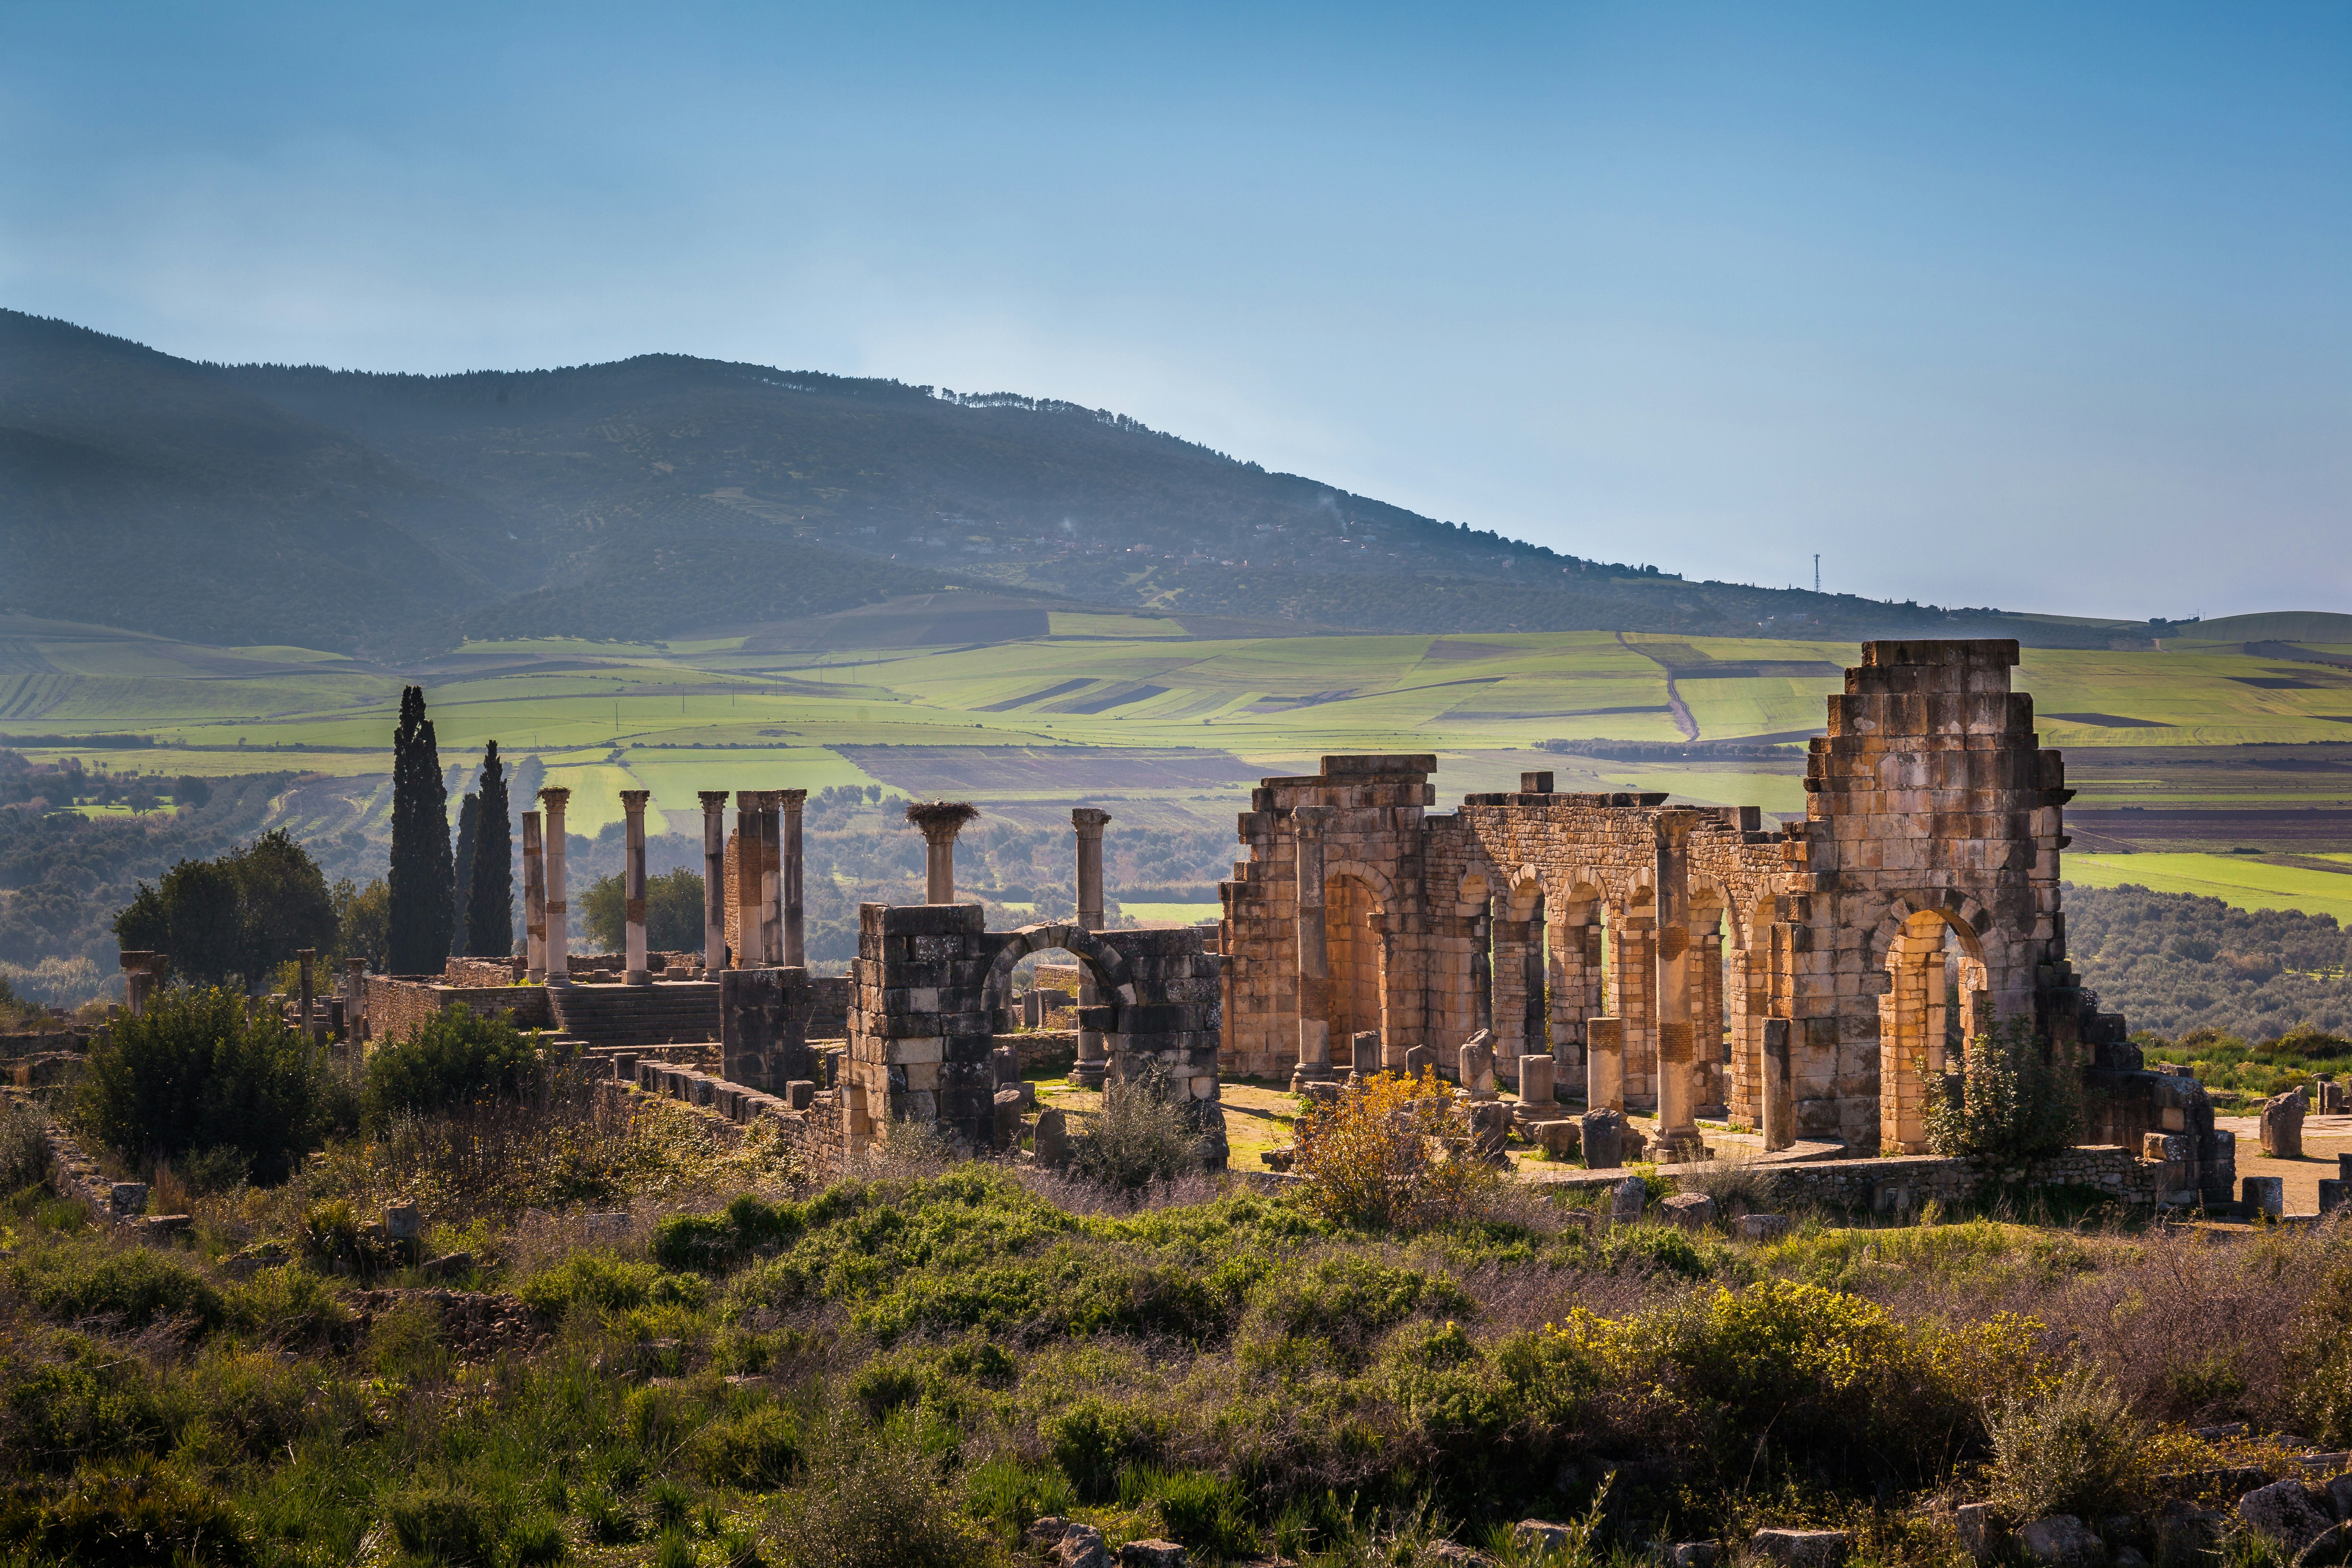 The ruins of the ancient Roman basilica of Volubilis sit amidst green and bronw scrub against a background of light green rolling farmpland and the long sloping line of a mountain in the background